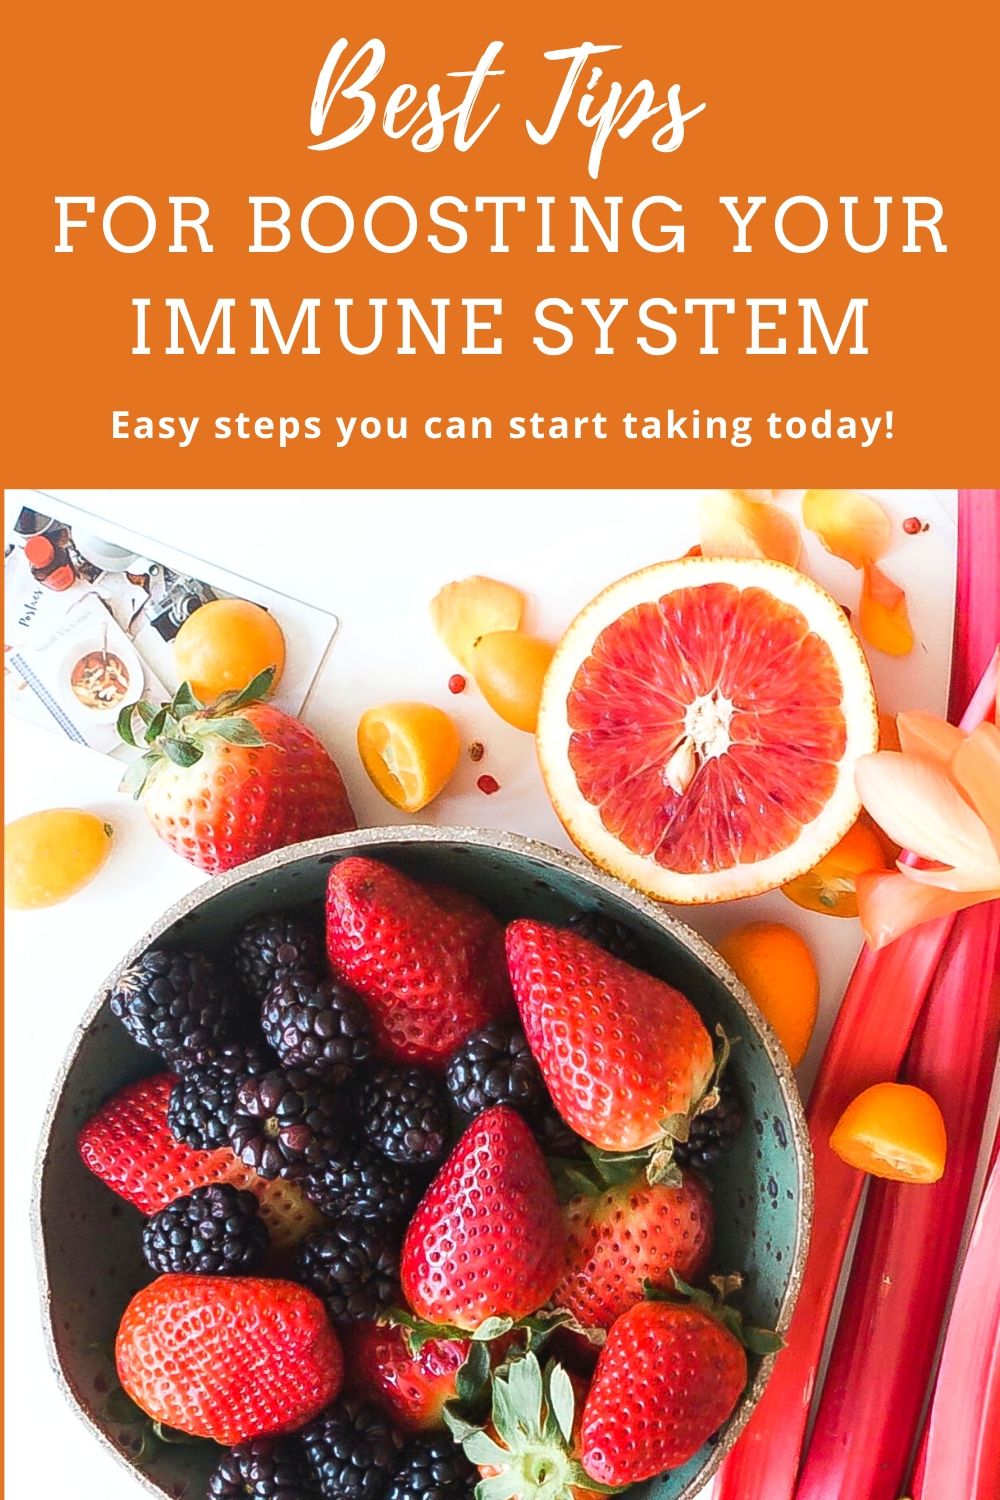 Best tips for boosting your immune system